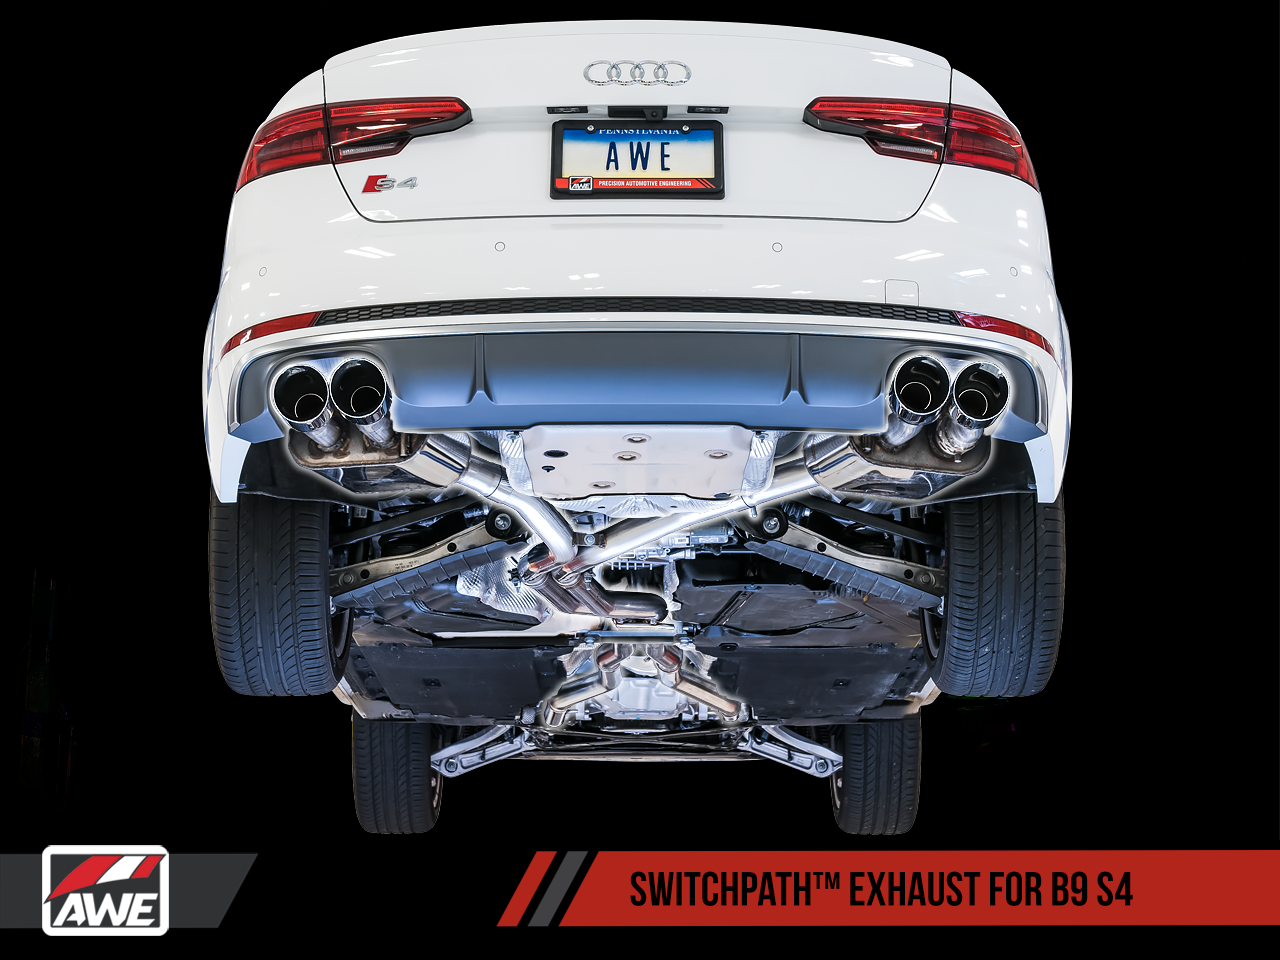 AWE SwitchPath™ Exhaust for B9 S4 - Resonated for Performance Catalyst - Chrome Silver 90mm Tips